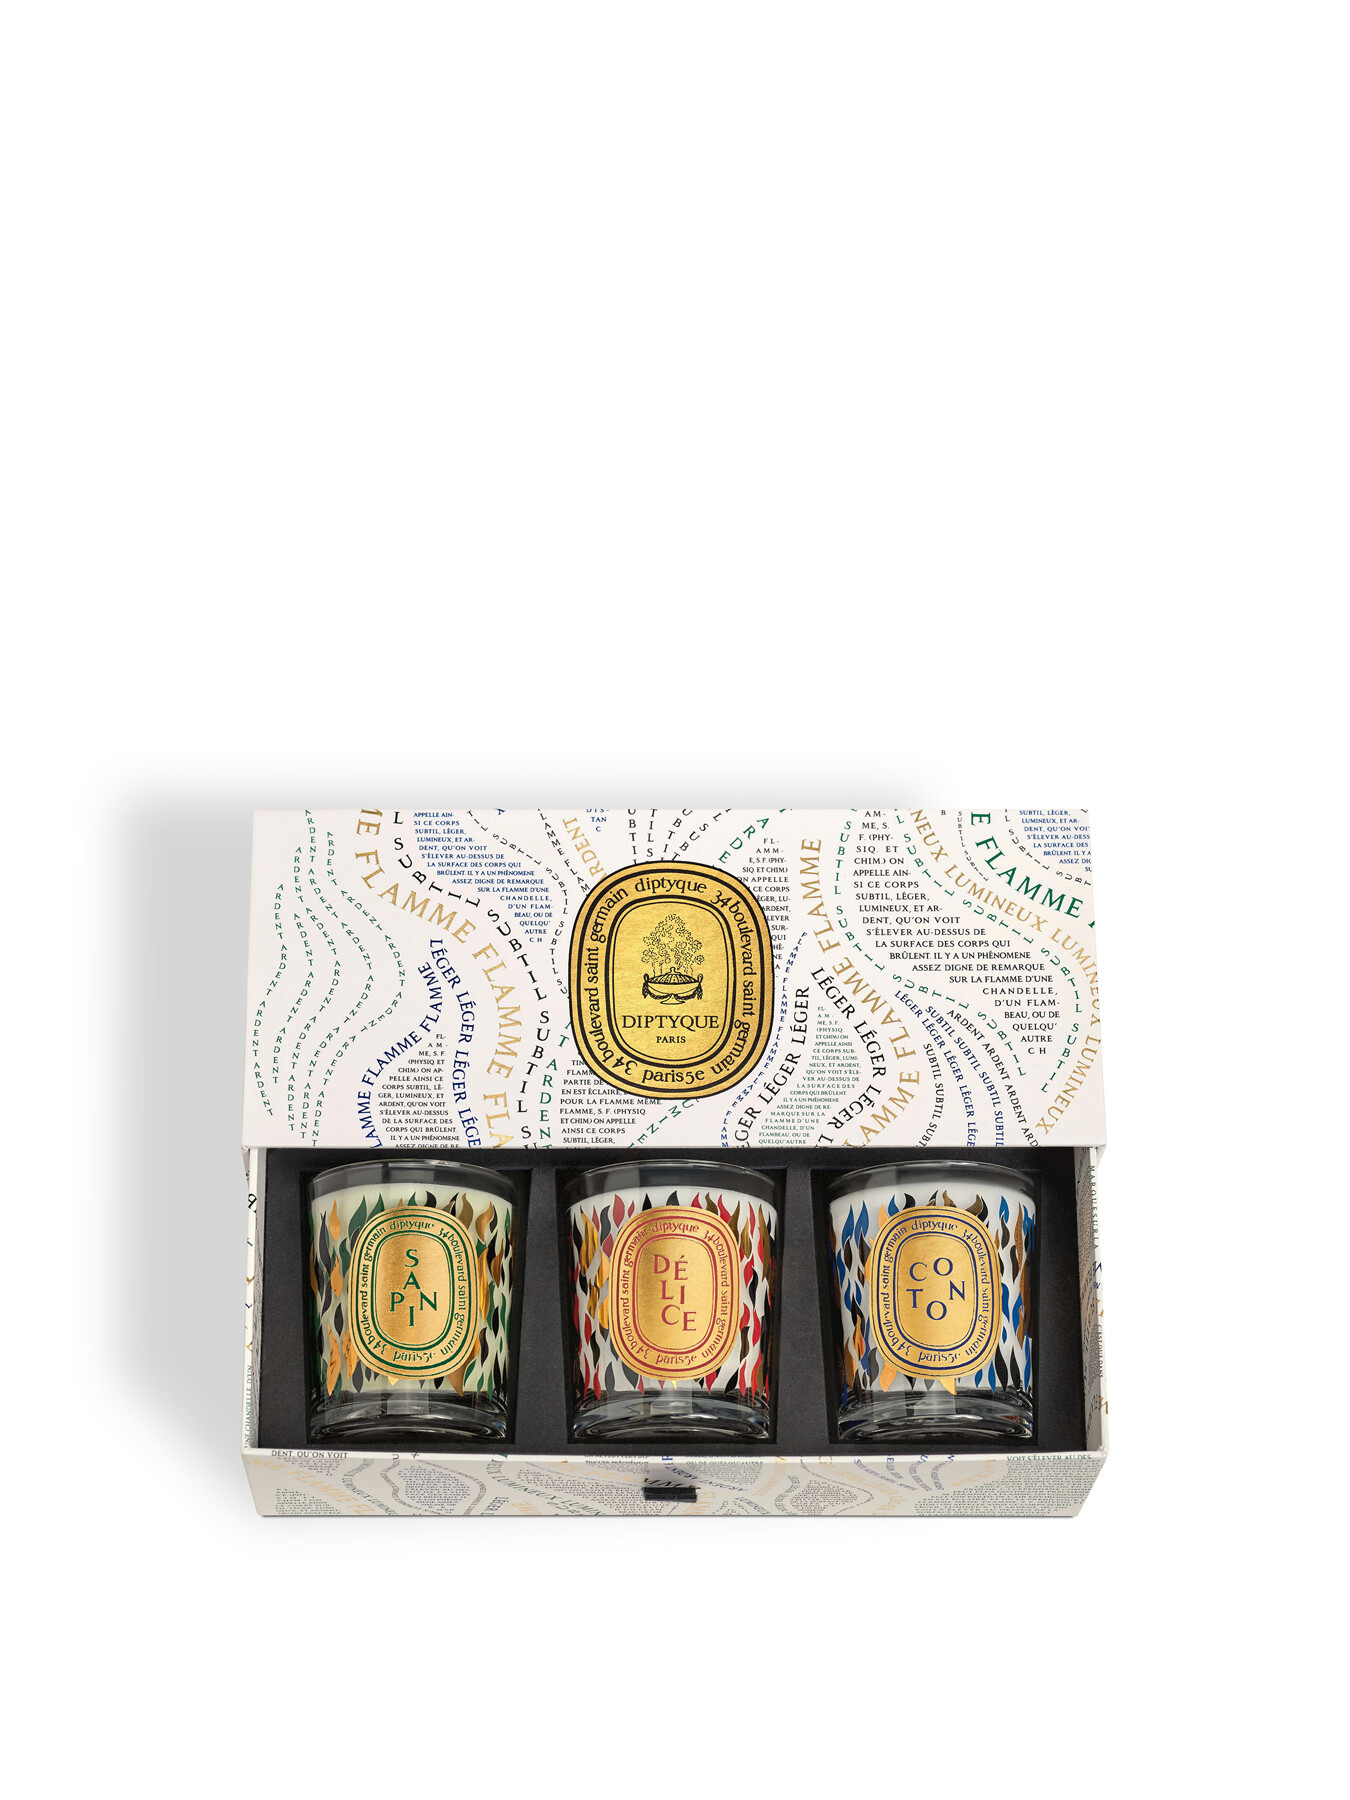 Diptyque Candle Set 3 x 70g Limited Edition | Fenwick